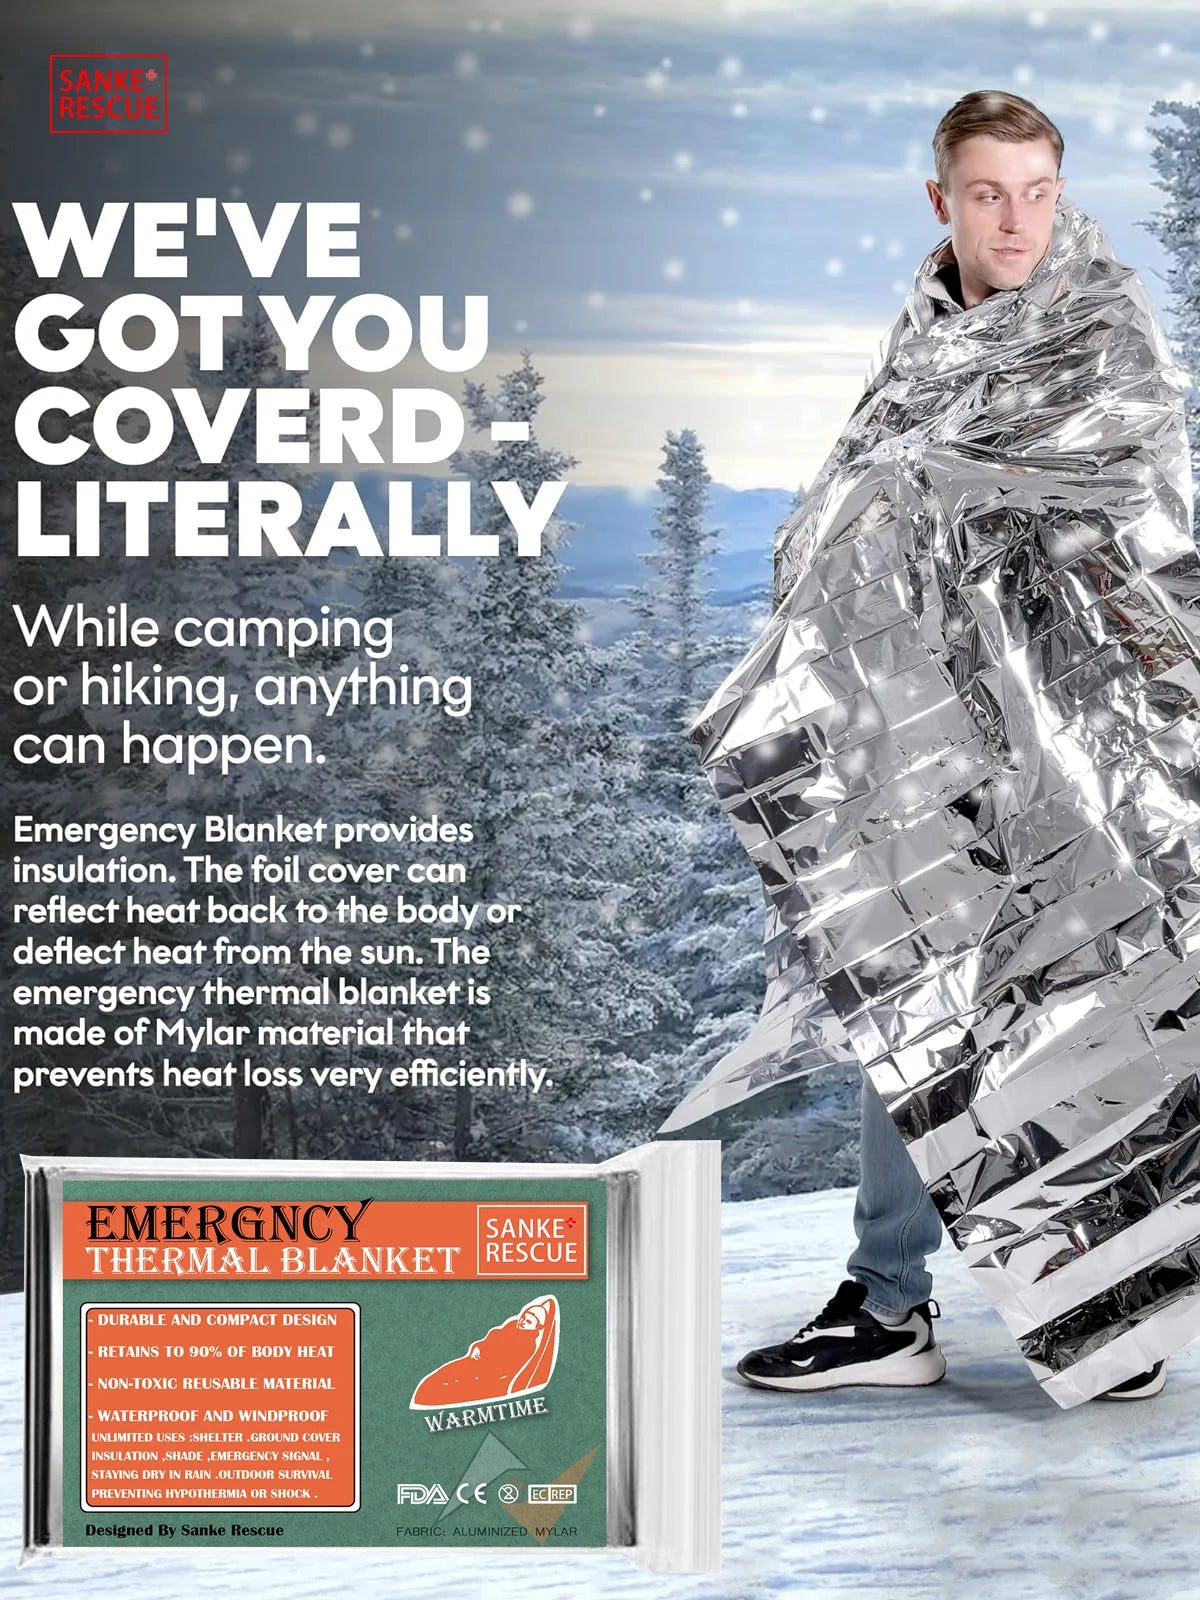 Hypothermia rescue first aid kit camp keep foil mylar lifesave warm heat bushcraft outdoor thermal dry emergent blanket survive